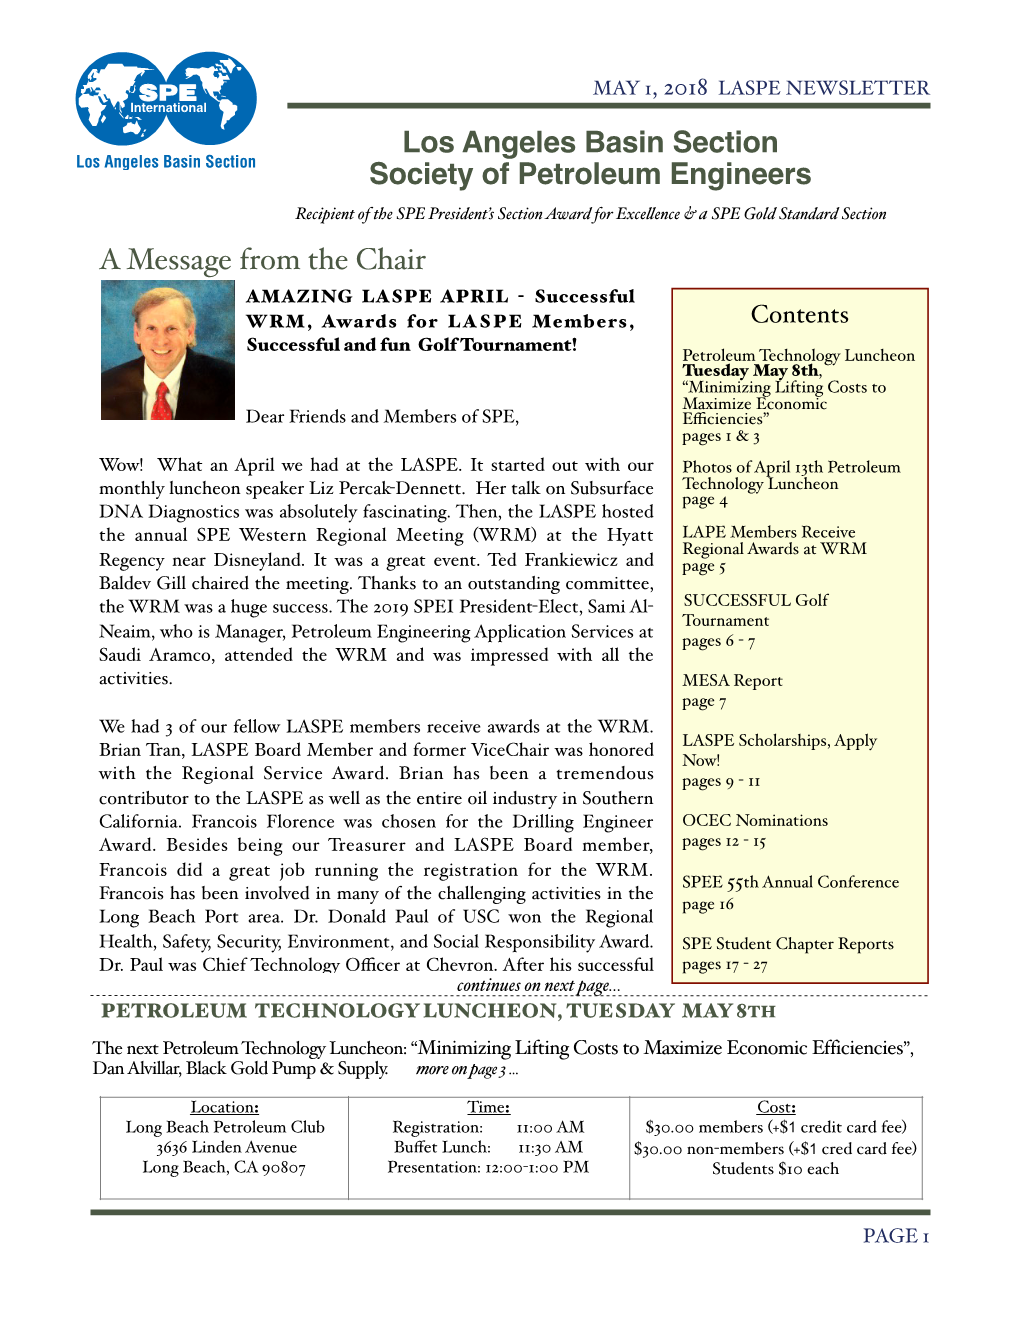 Los Angeles Basin Section Society of Petroleum Engineers a Message